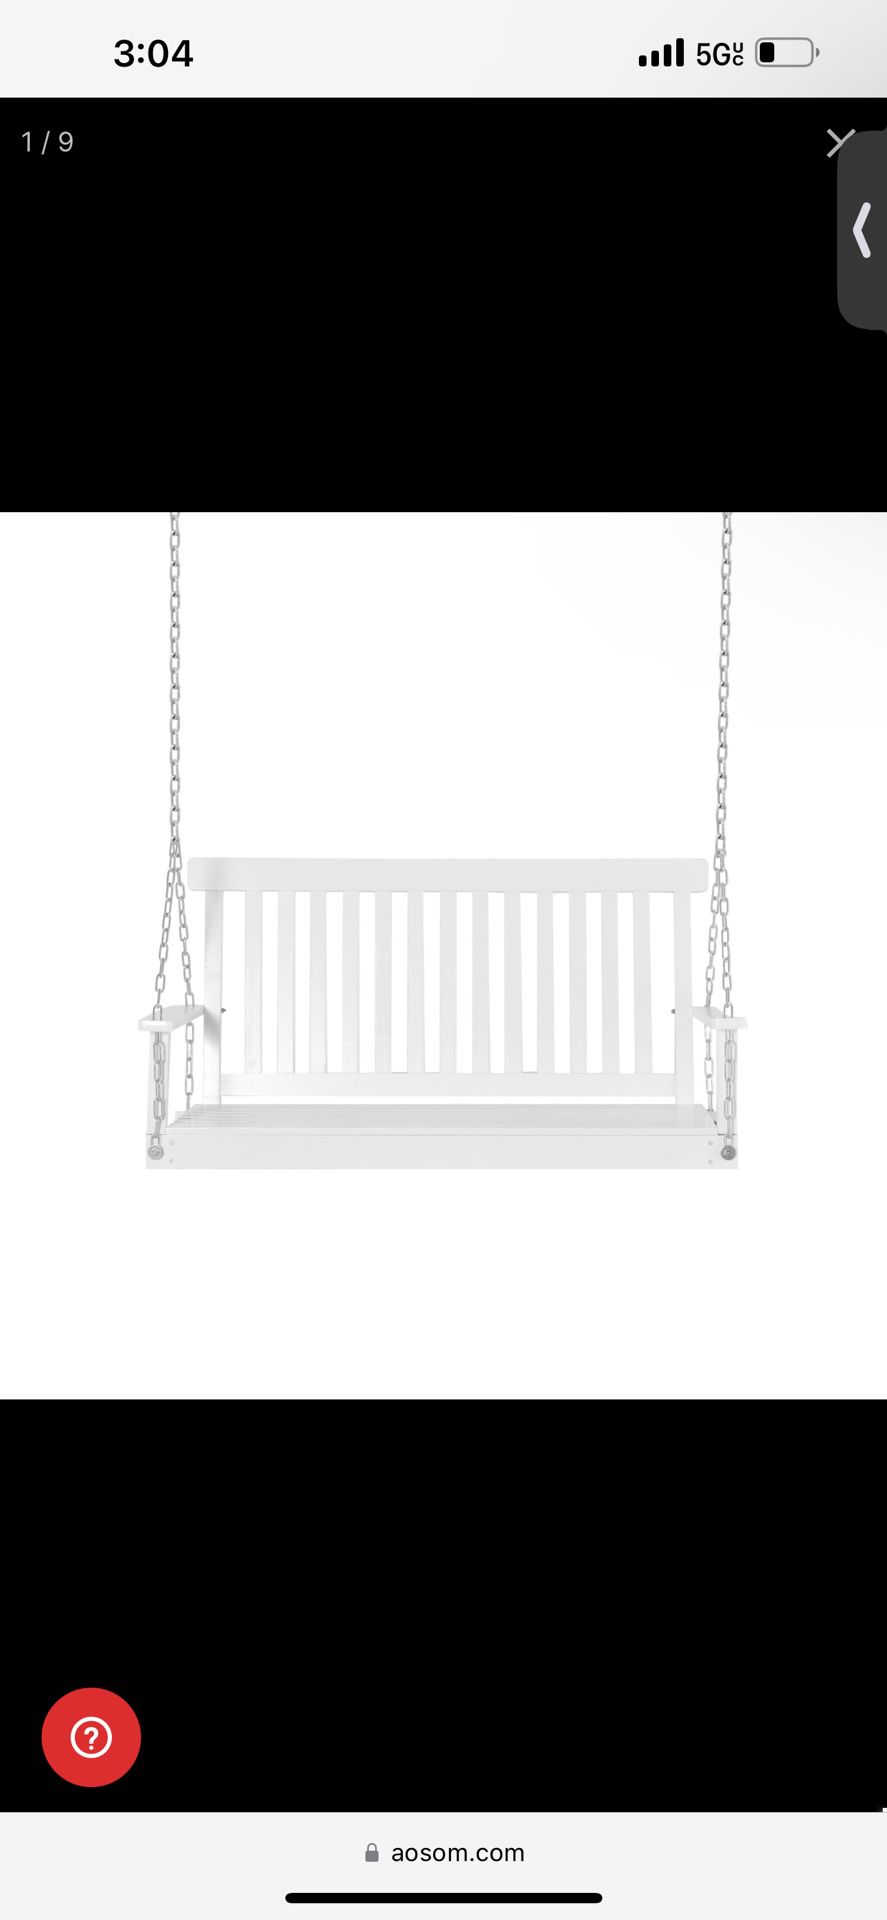 New in box 2-Seater Hanging Porch Swing Outdoor Patio Swing Chair Seat with Slatted Build and Chains, 440lbs Weight Capacity, White 84a-154wt